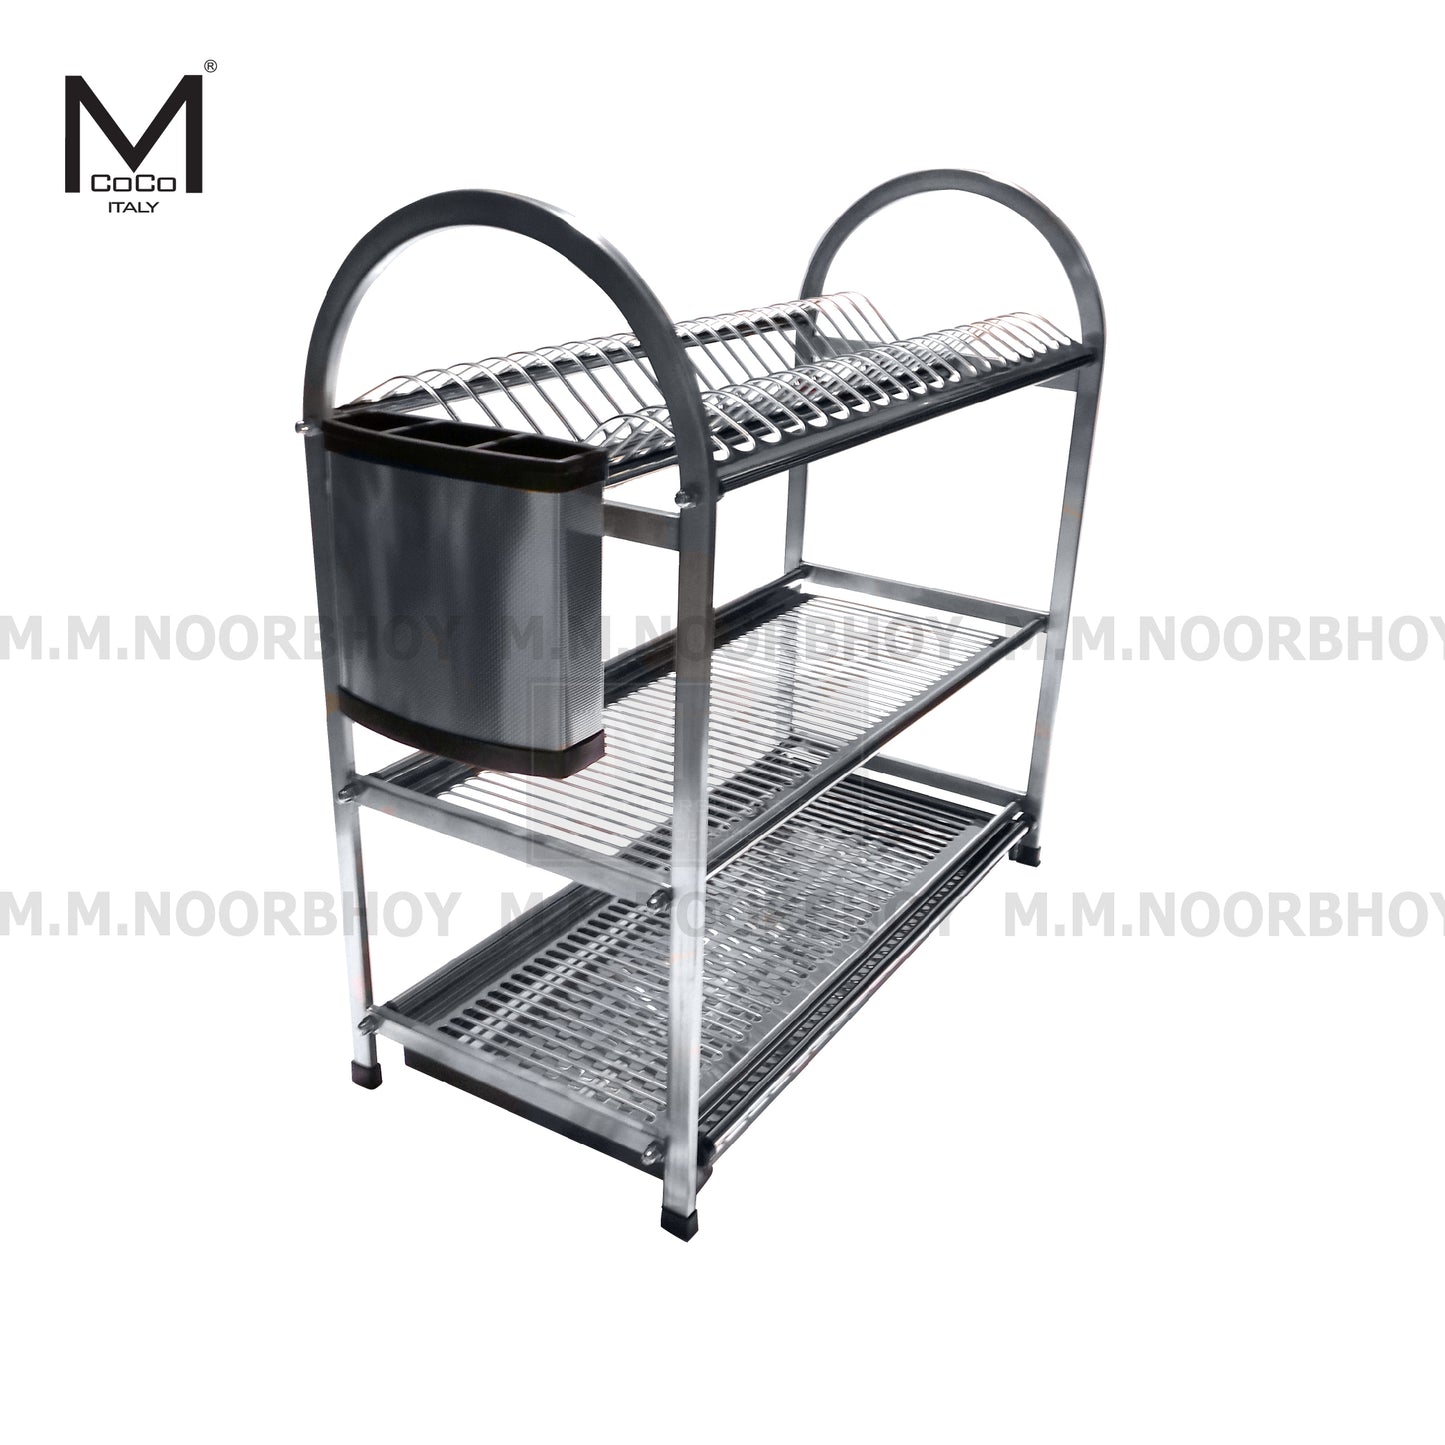 Mcoco Stand 3 Shelf Dish Rack With Cutlery & Spoon Holder Stainless Steel Finish - WDJ680